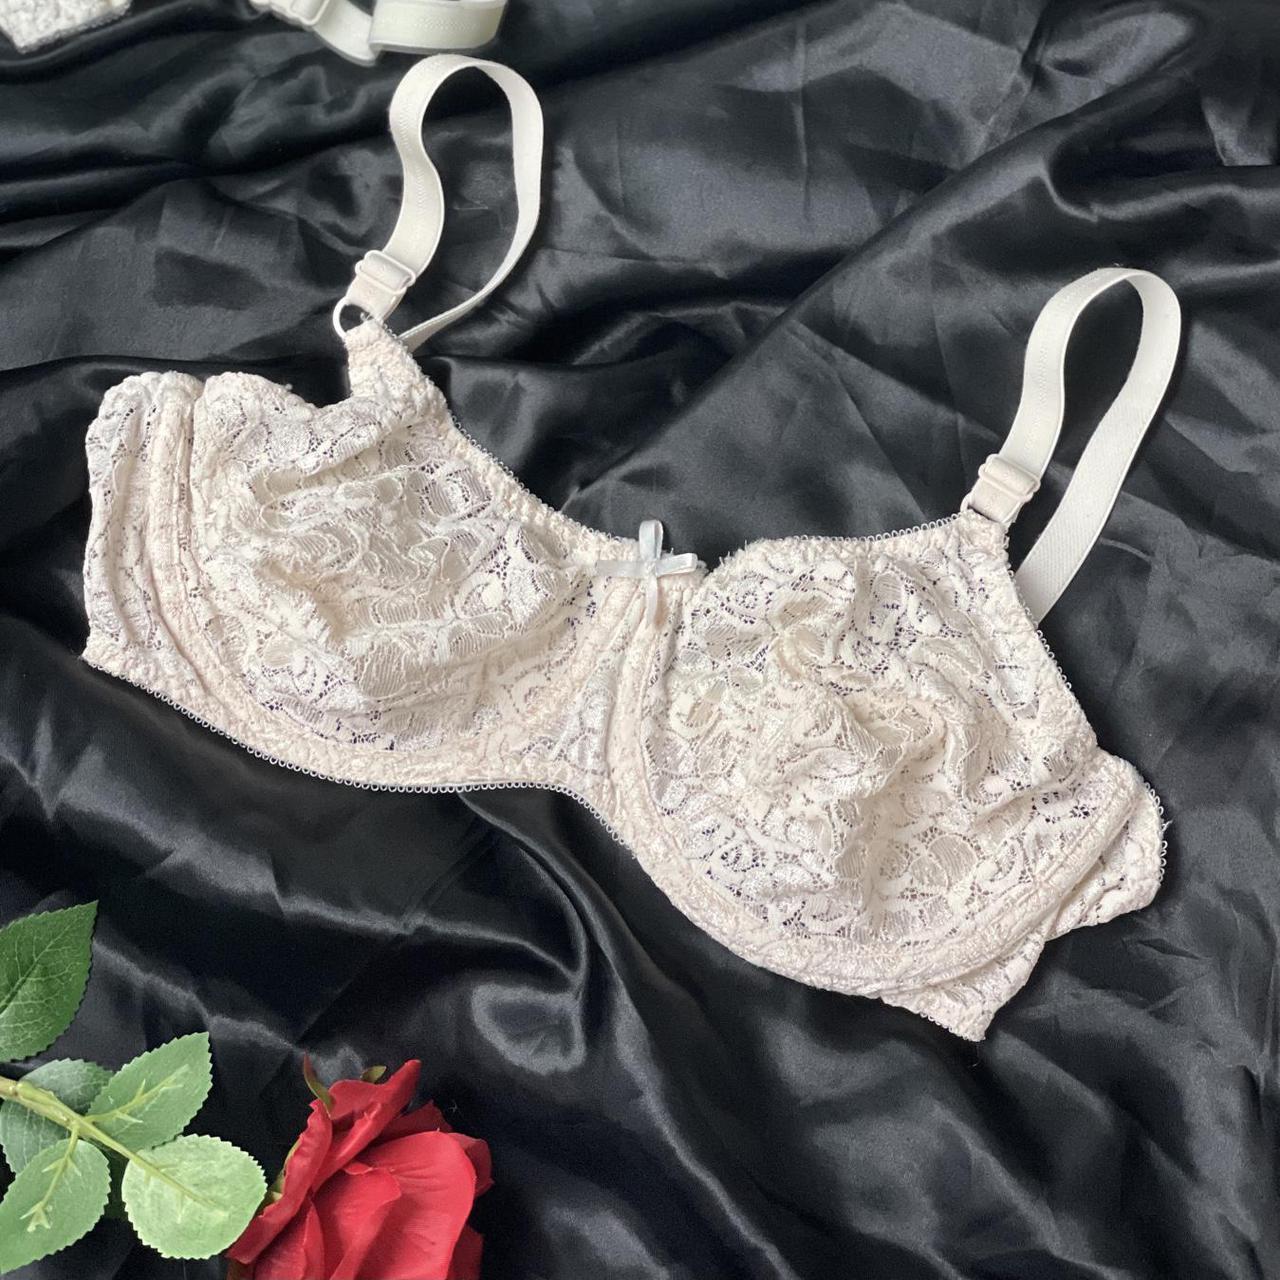 Vintage Lace Bra Cream Smart Choices by Playtex Two